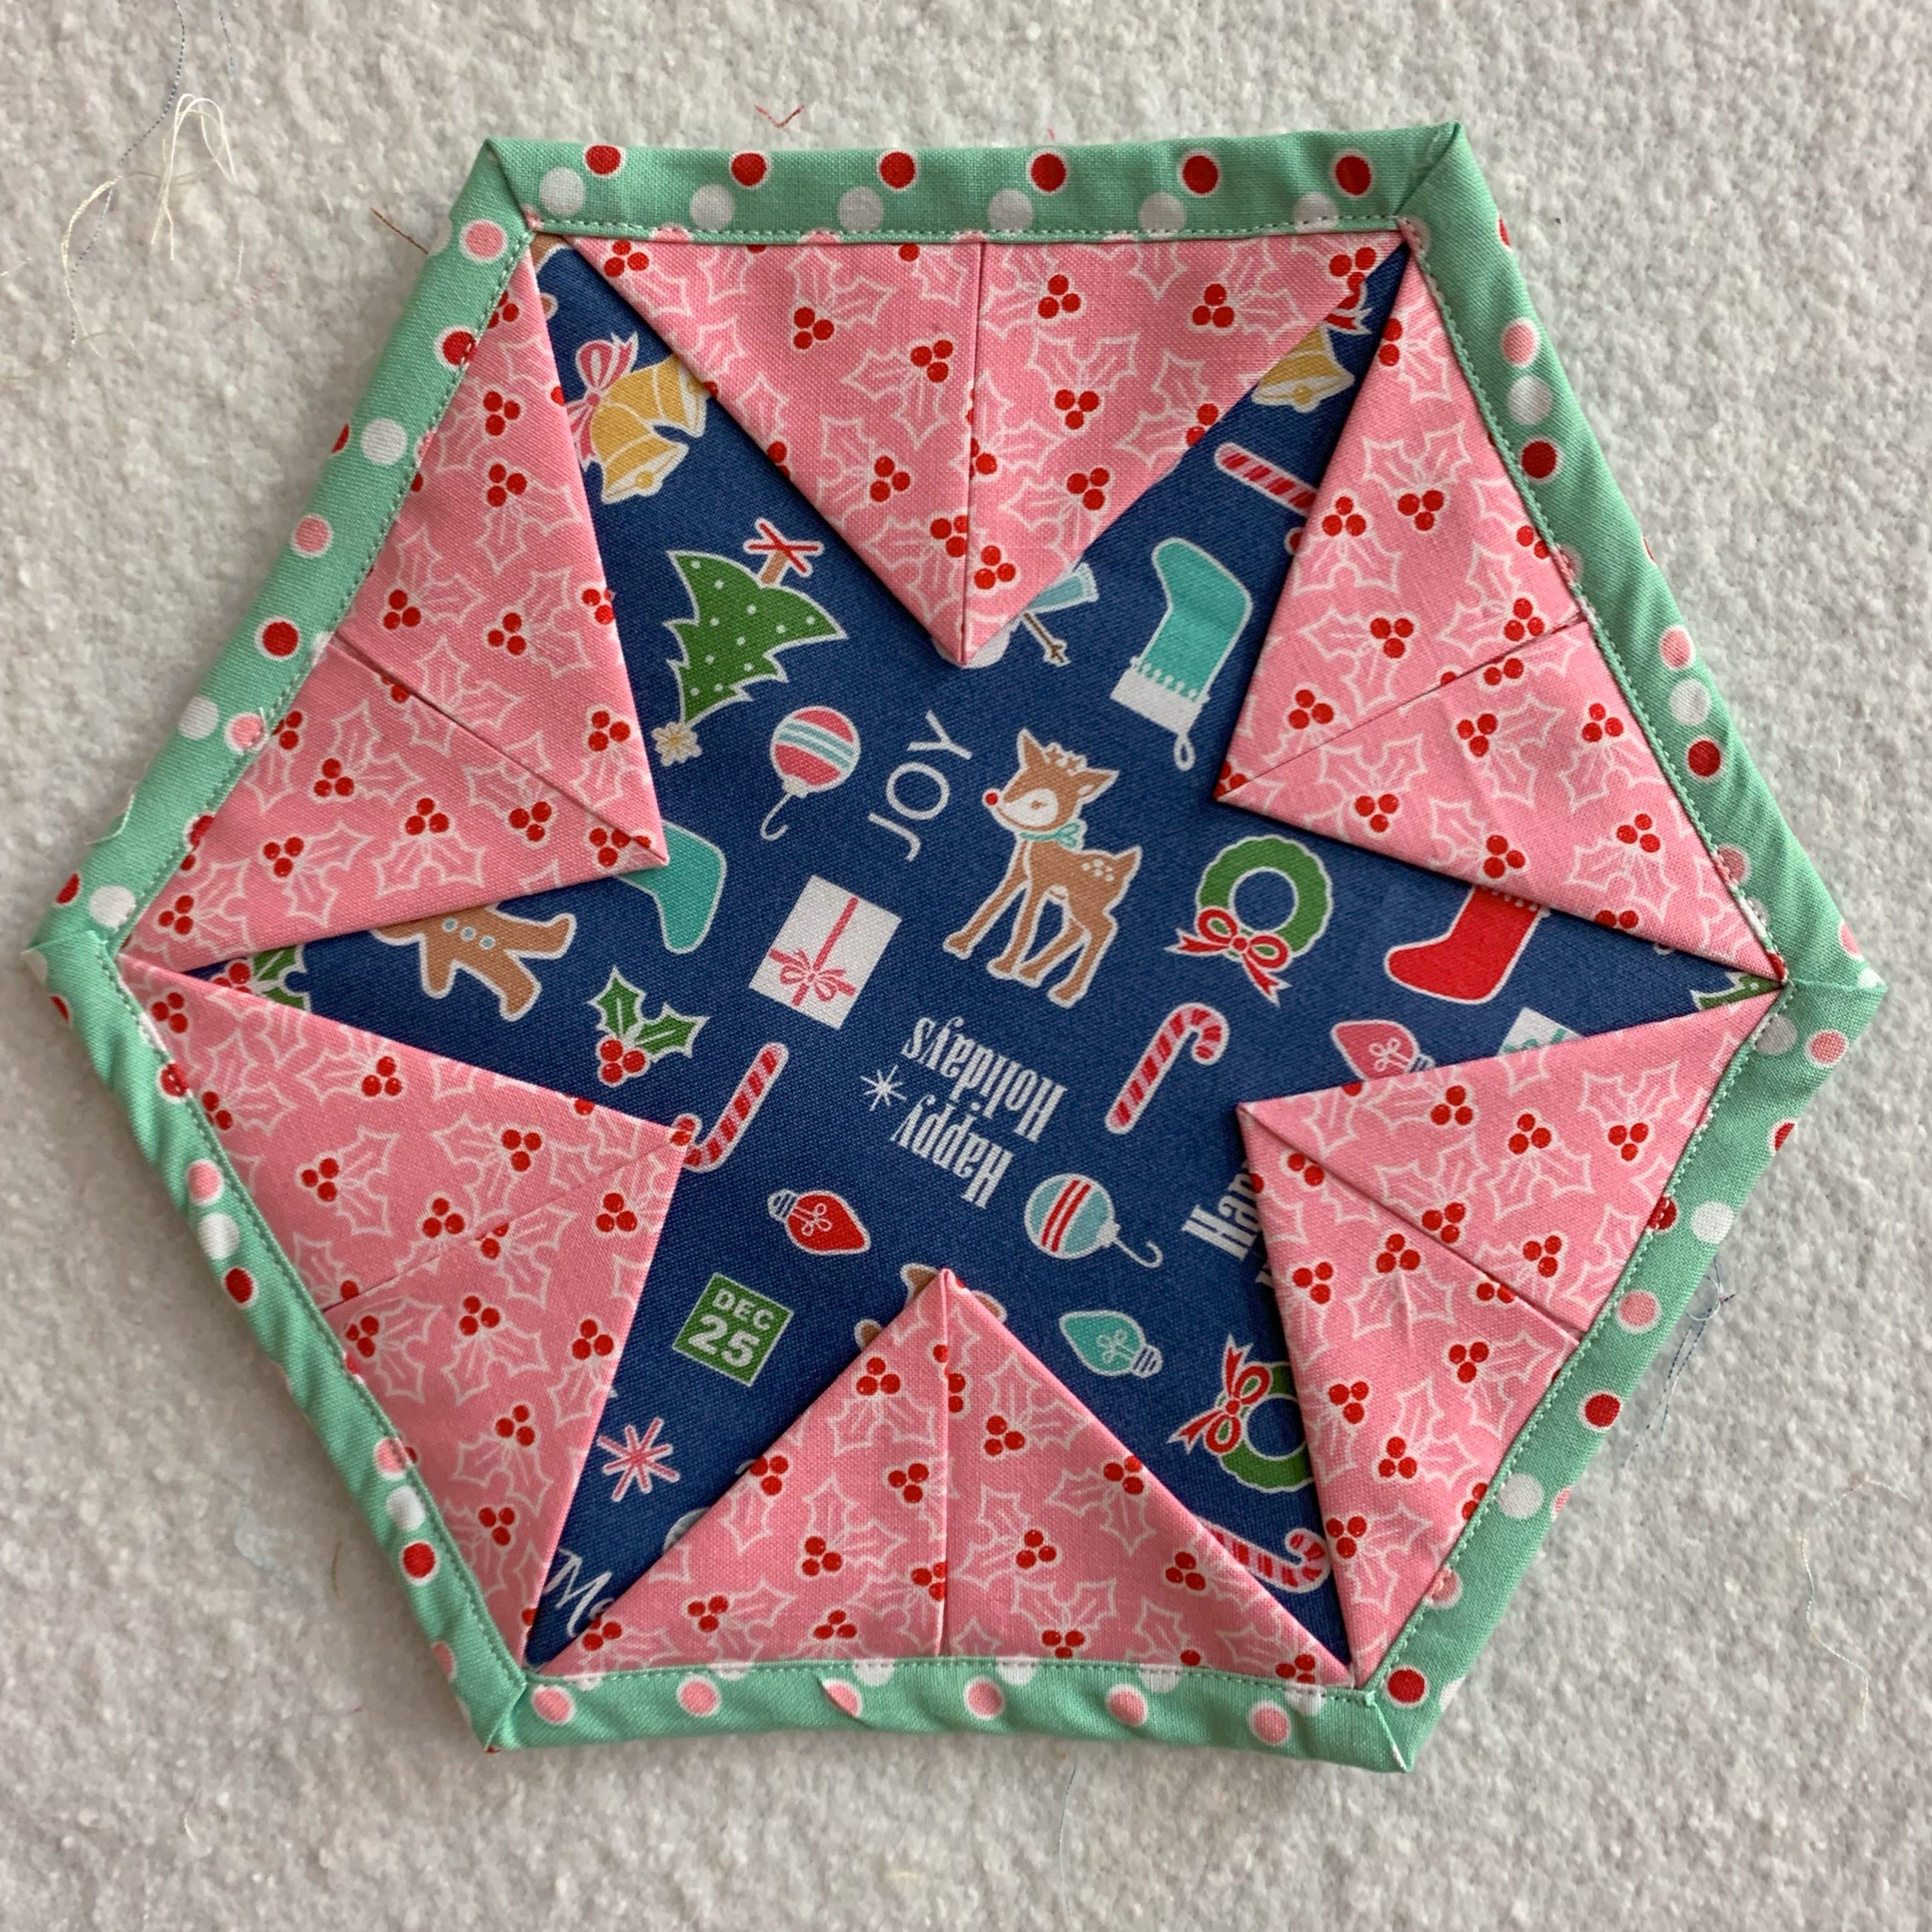 SCRAPPY HOT PAD PATTERN, HOW TO SEW A POT HOLDER with insul bright, and  quilt the hot pad. 